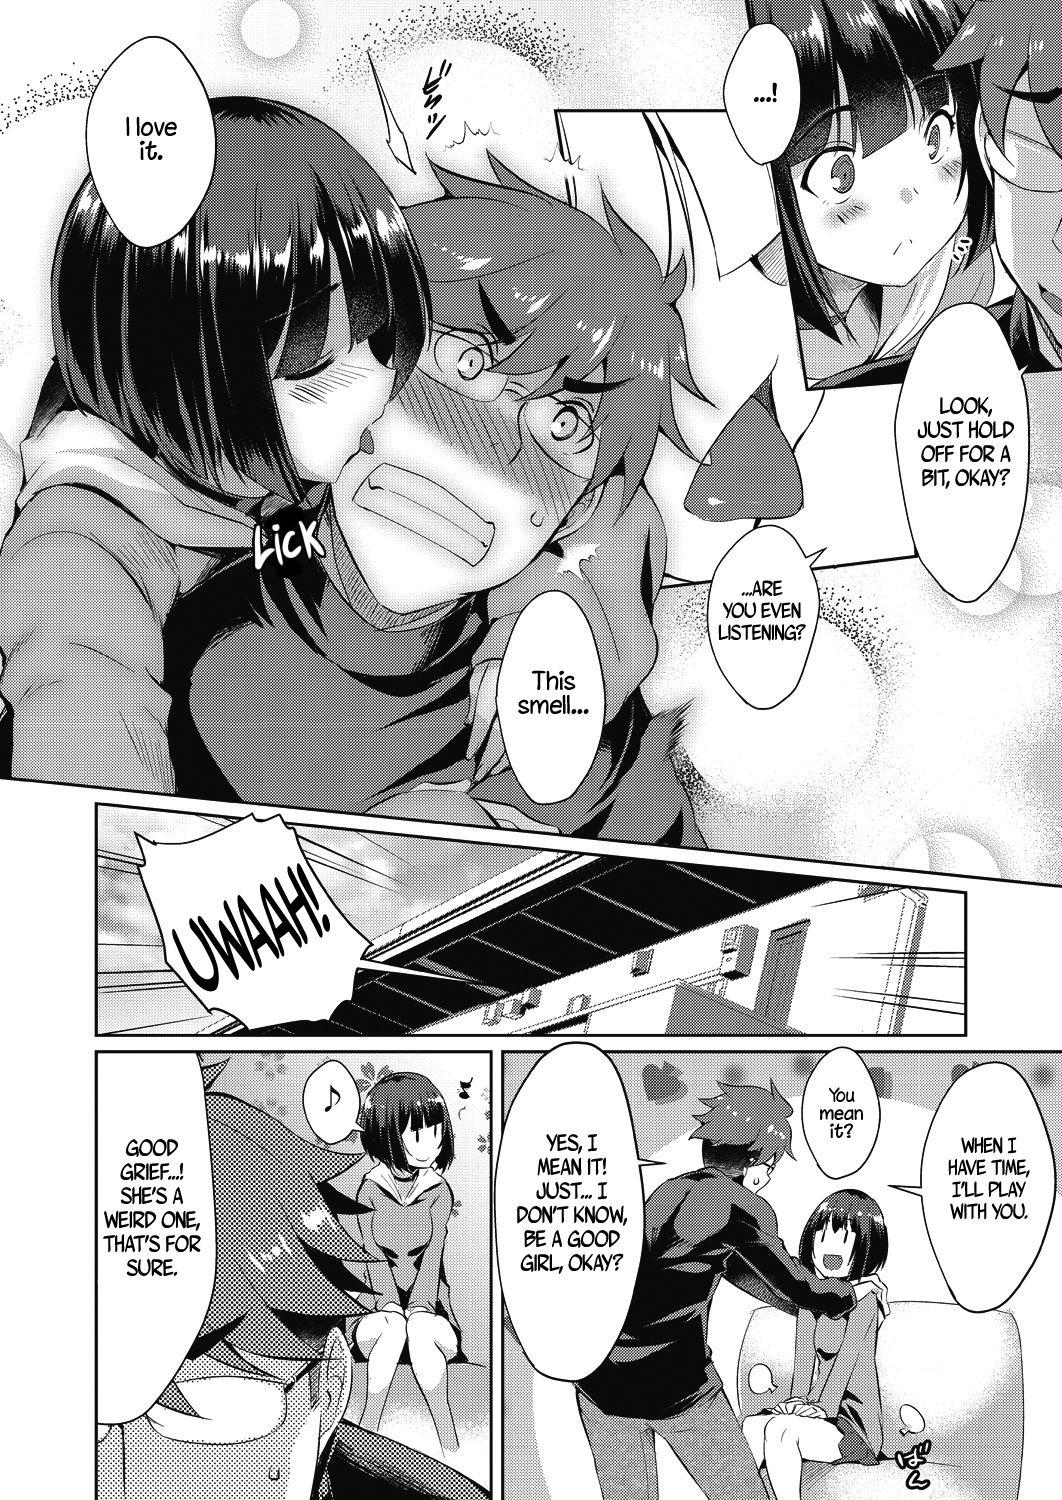 Butts Shion no Hana | Flowers for Shion Desperate - Page 6